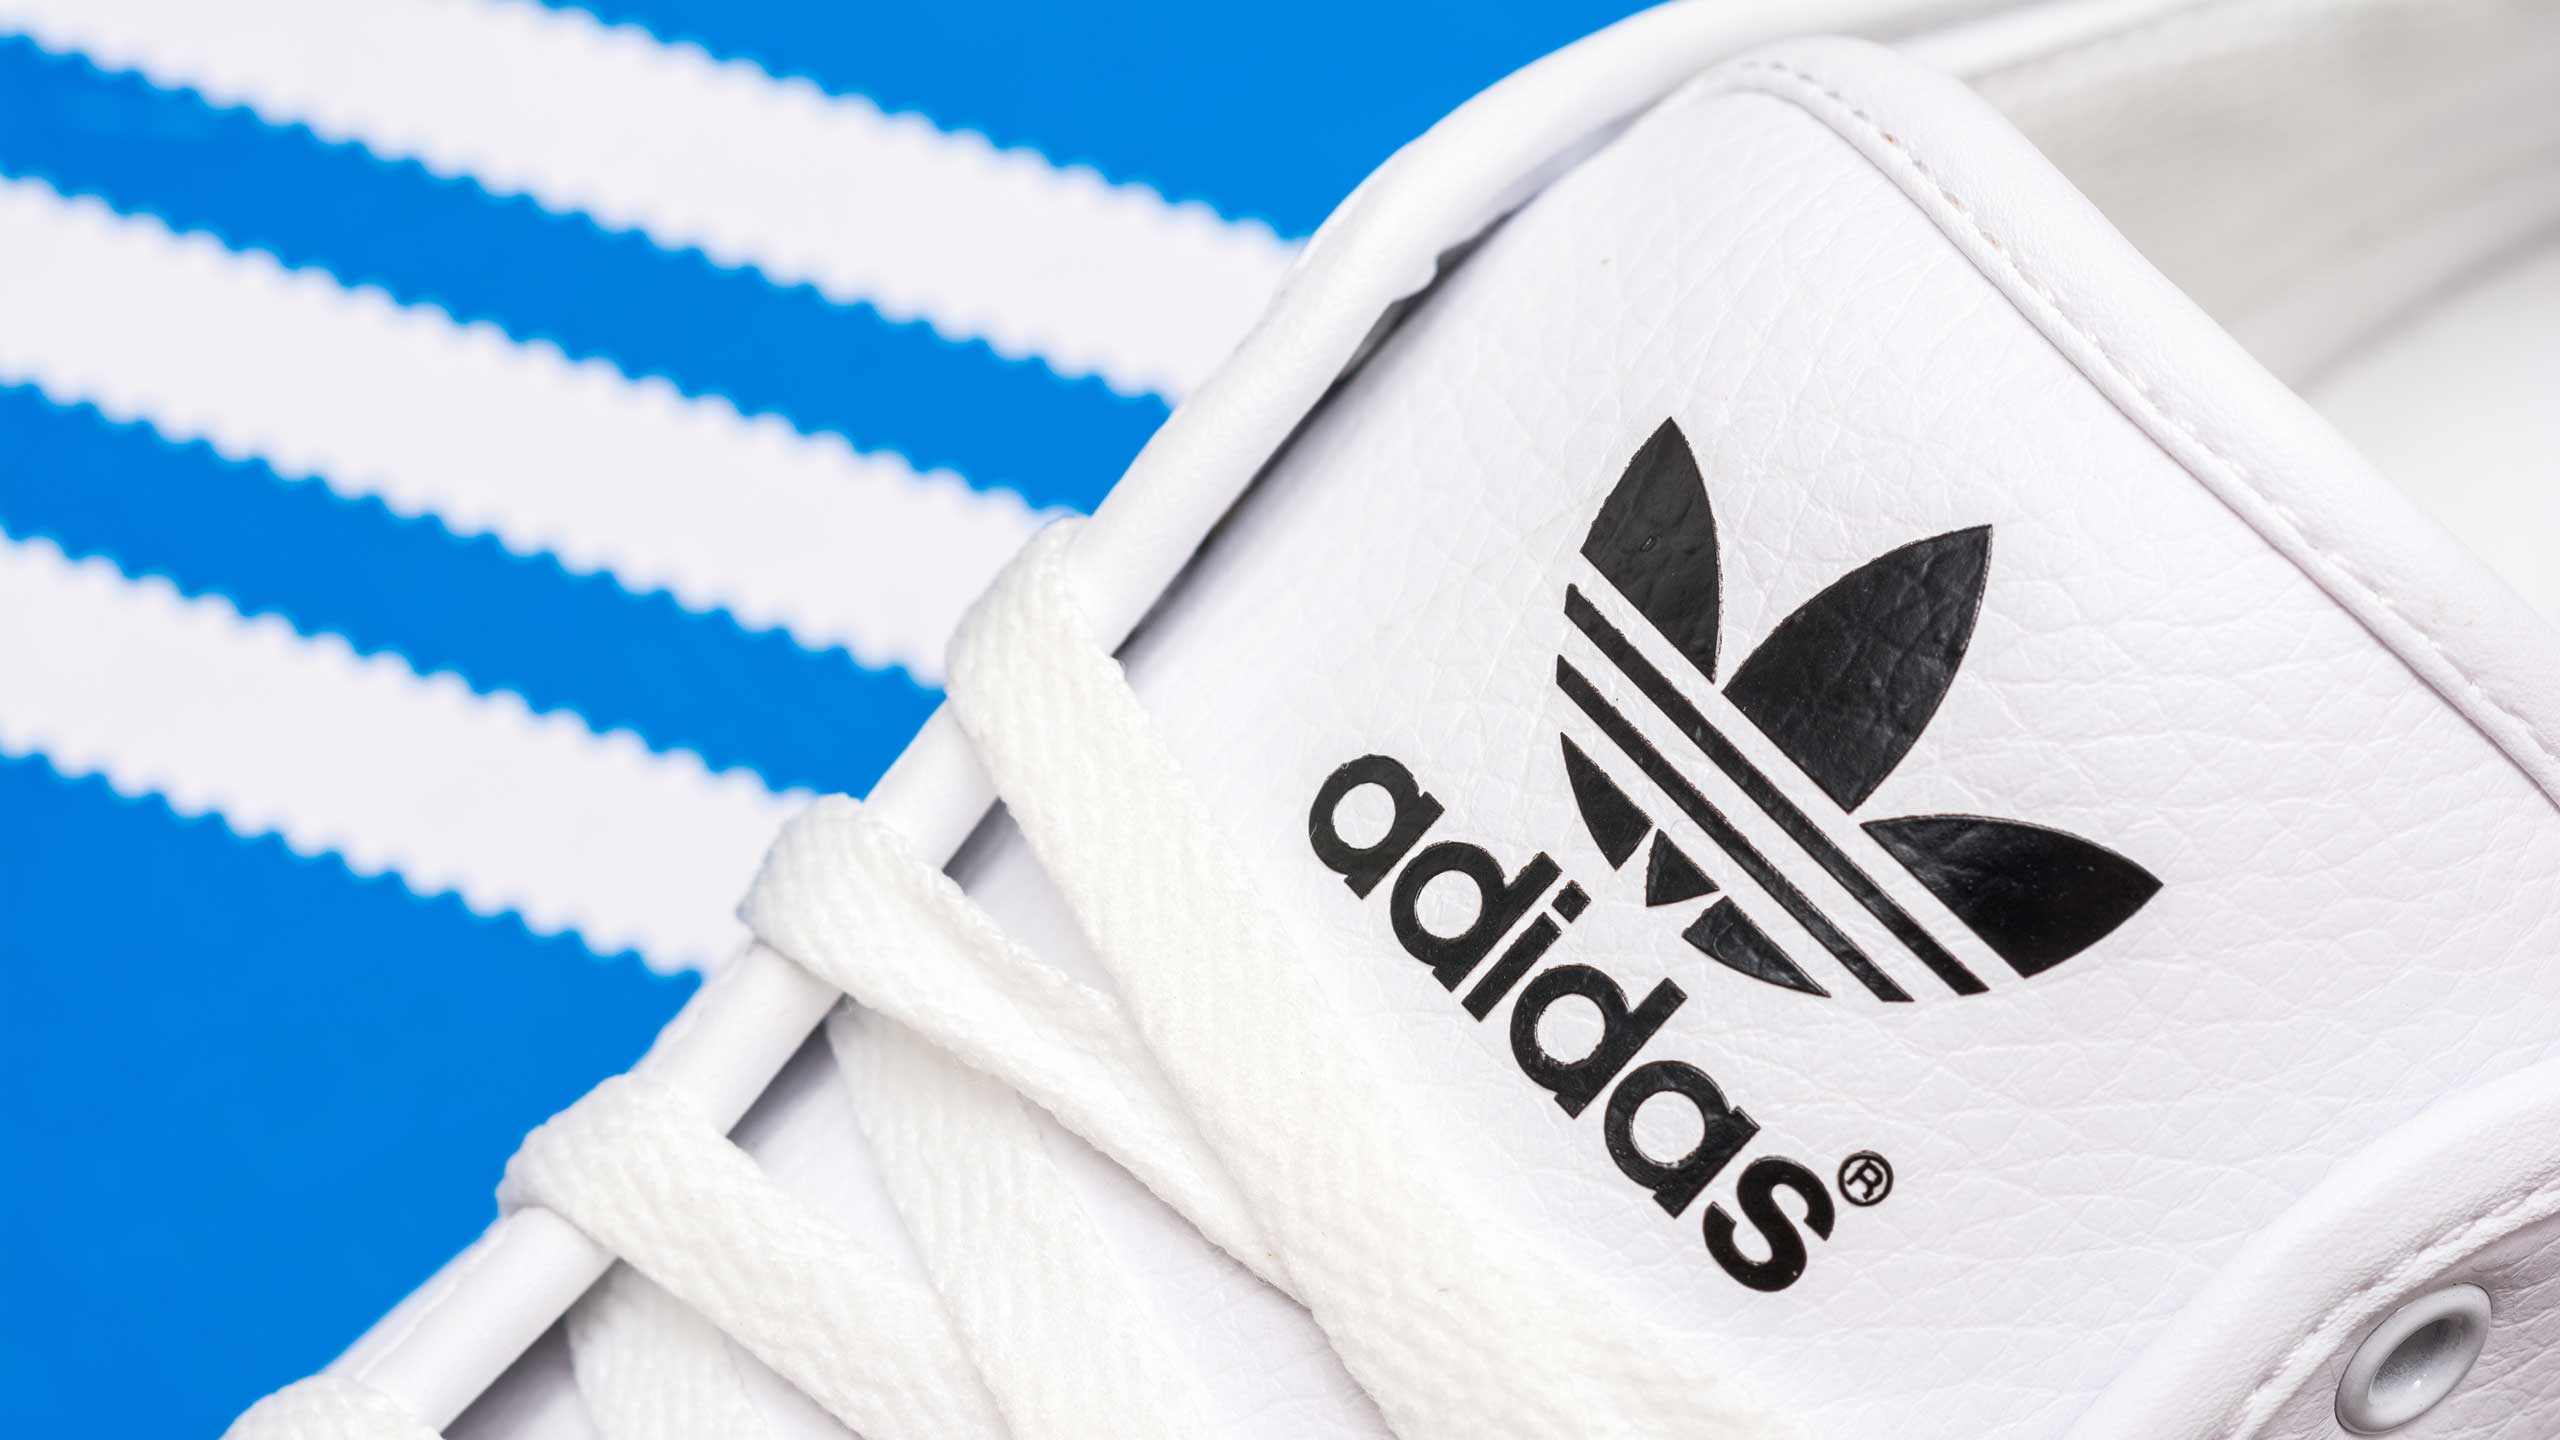 Adidas: The Best Sports Brand In The World - Strategy & Business Model.